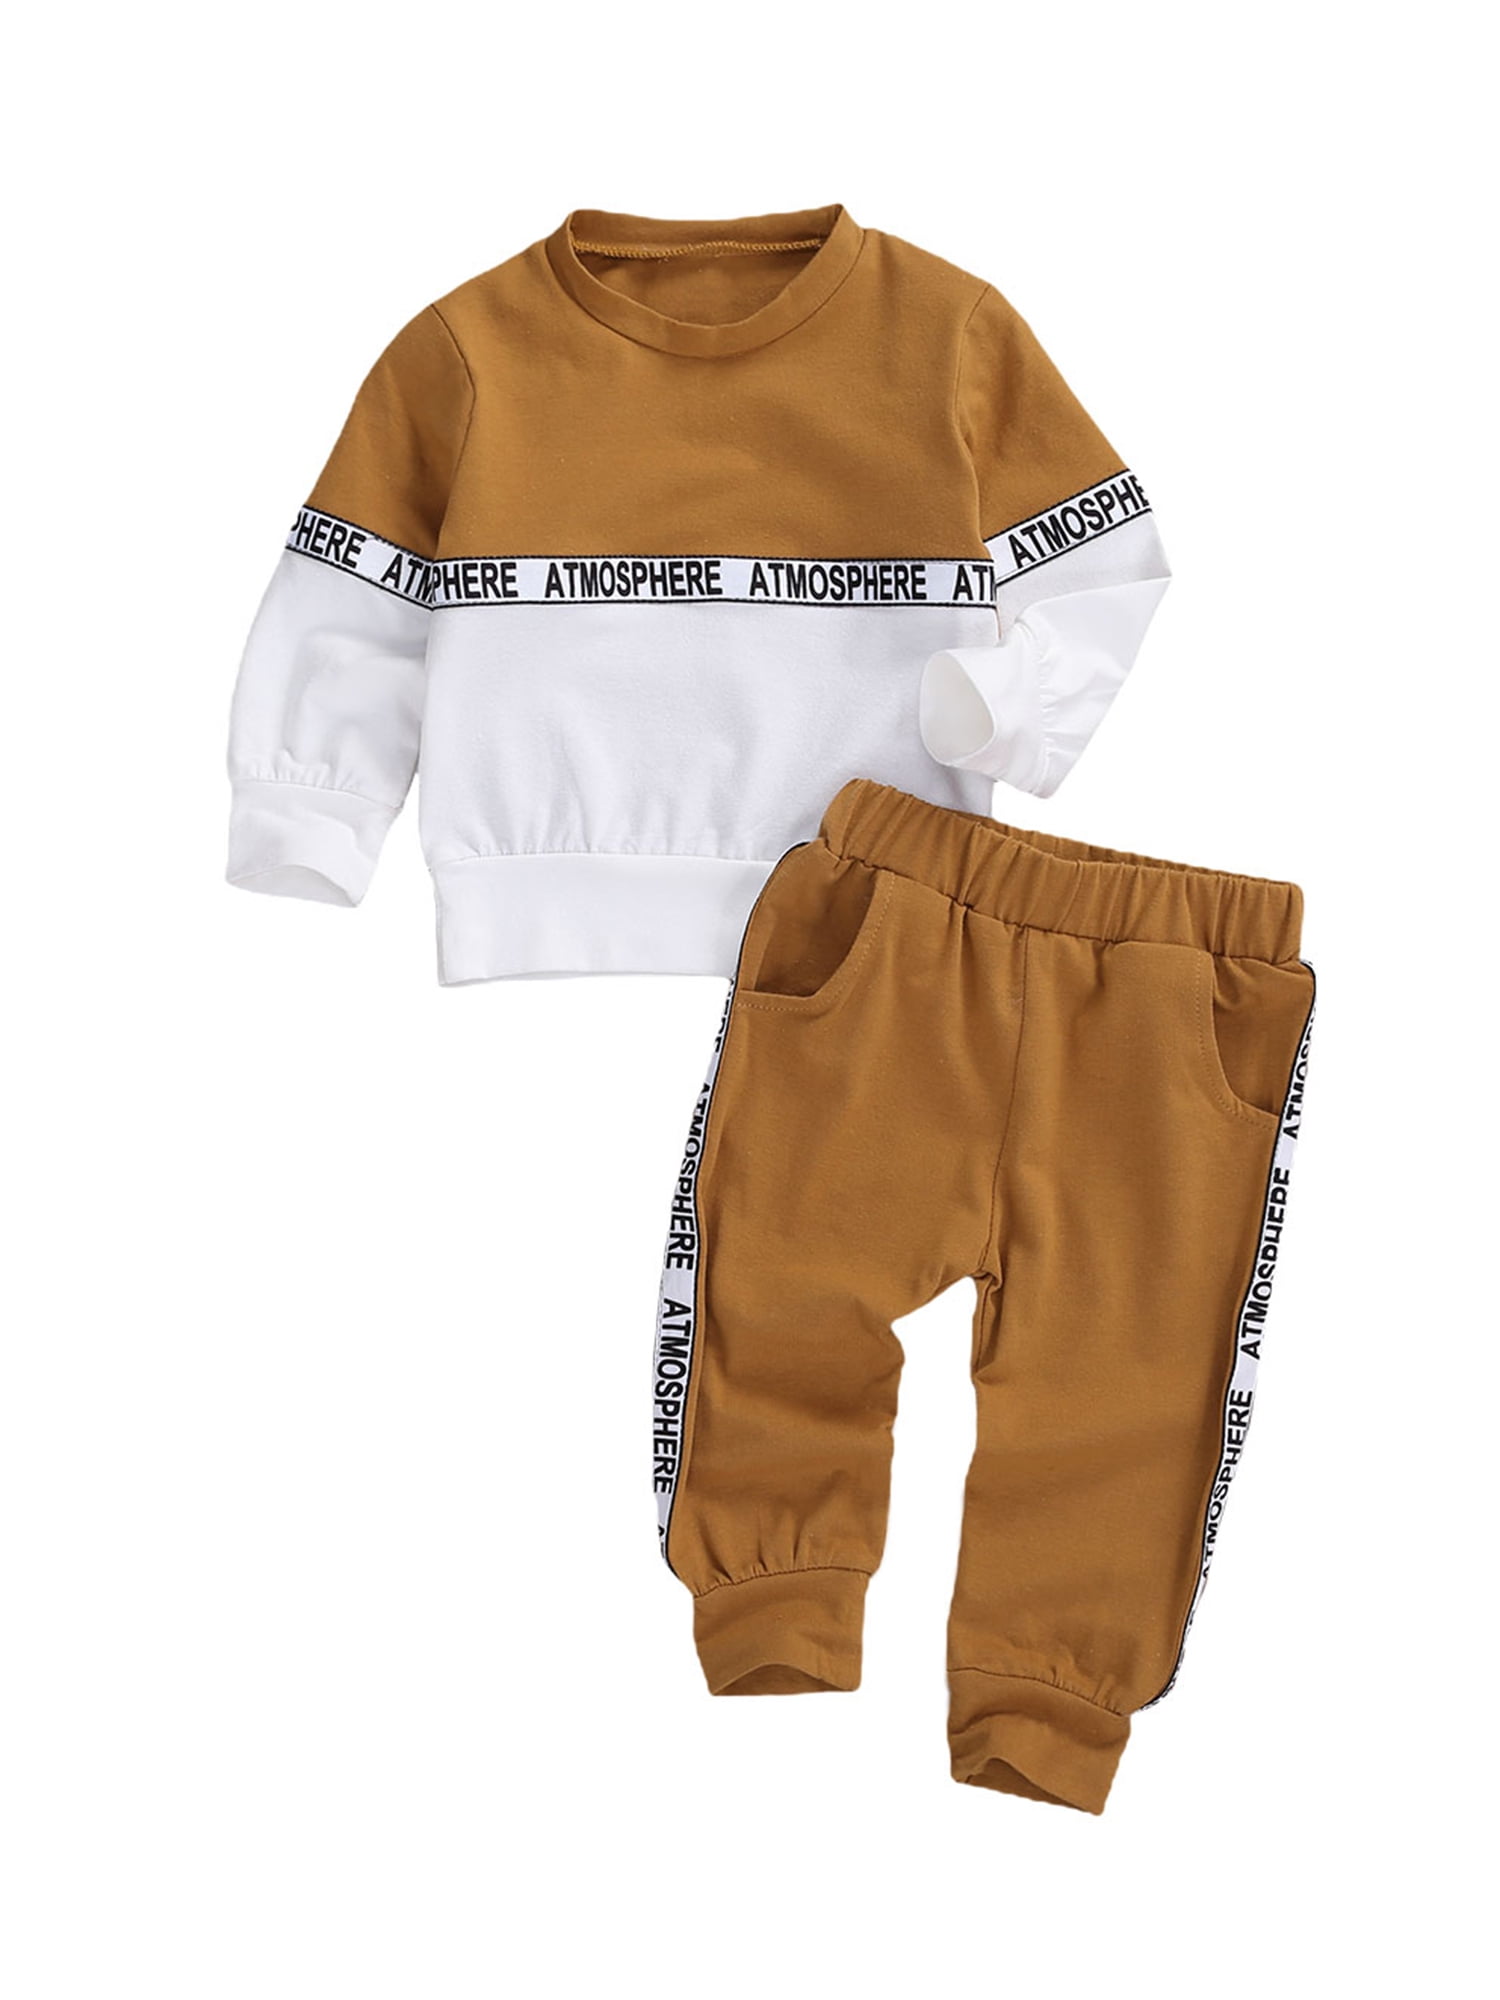 Toddler Baby Boy Outfit Letter Print Long Sleeve T-shirt Tops+Pants Trousers Set 